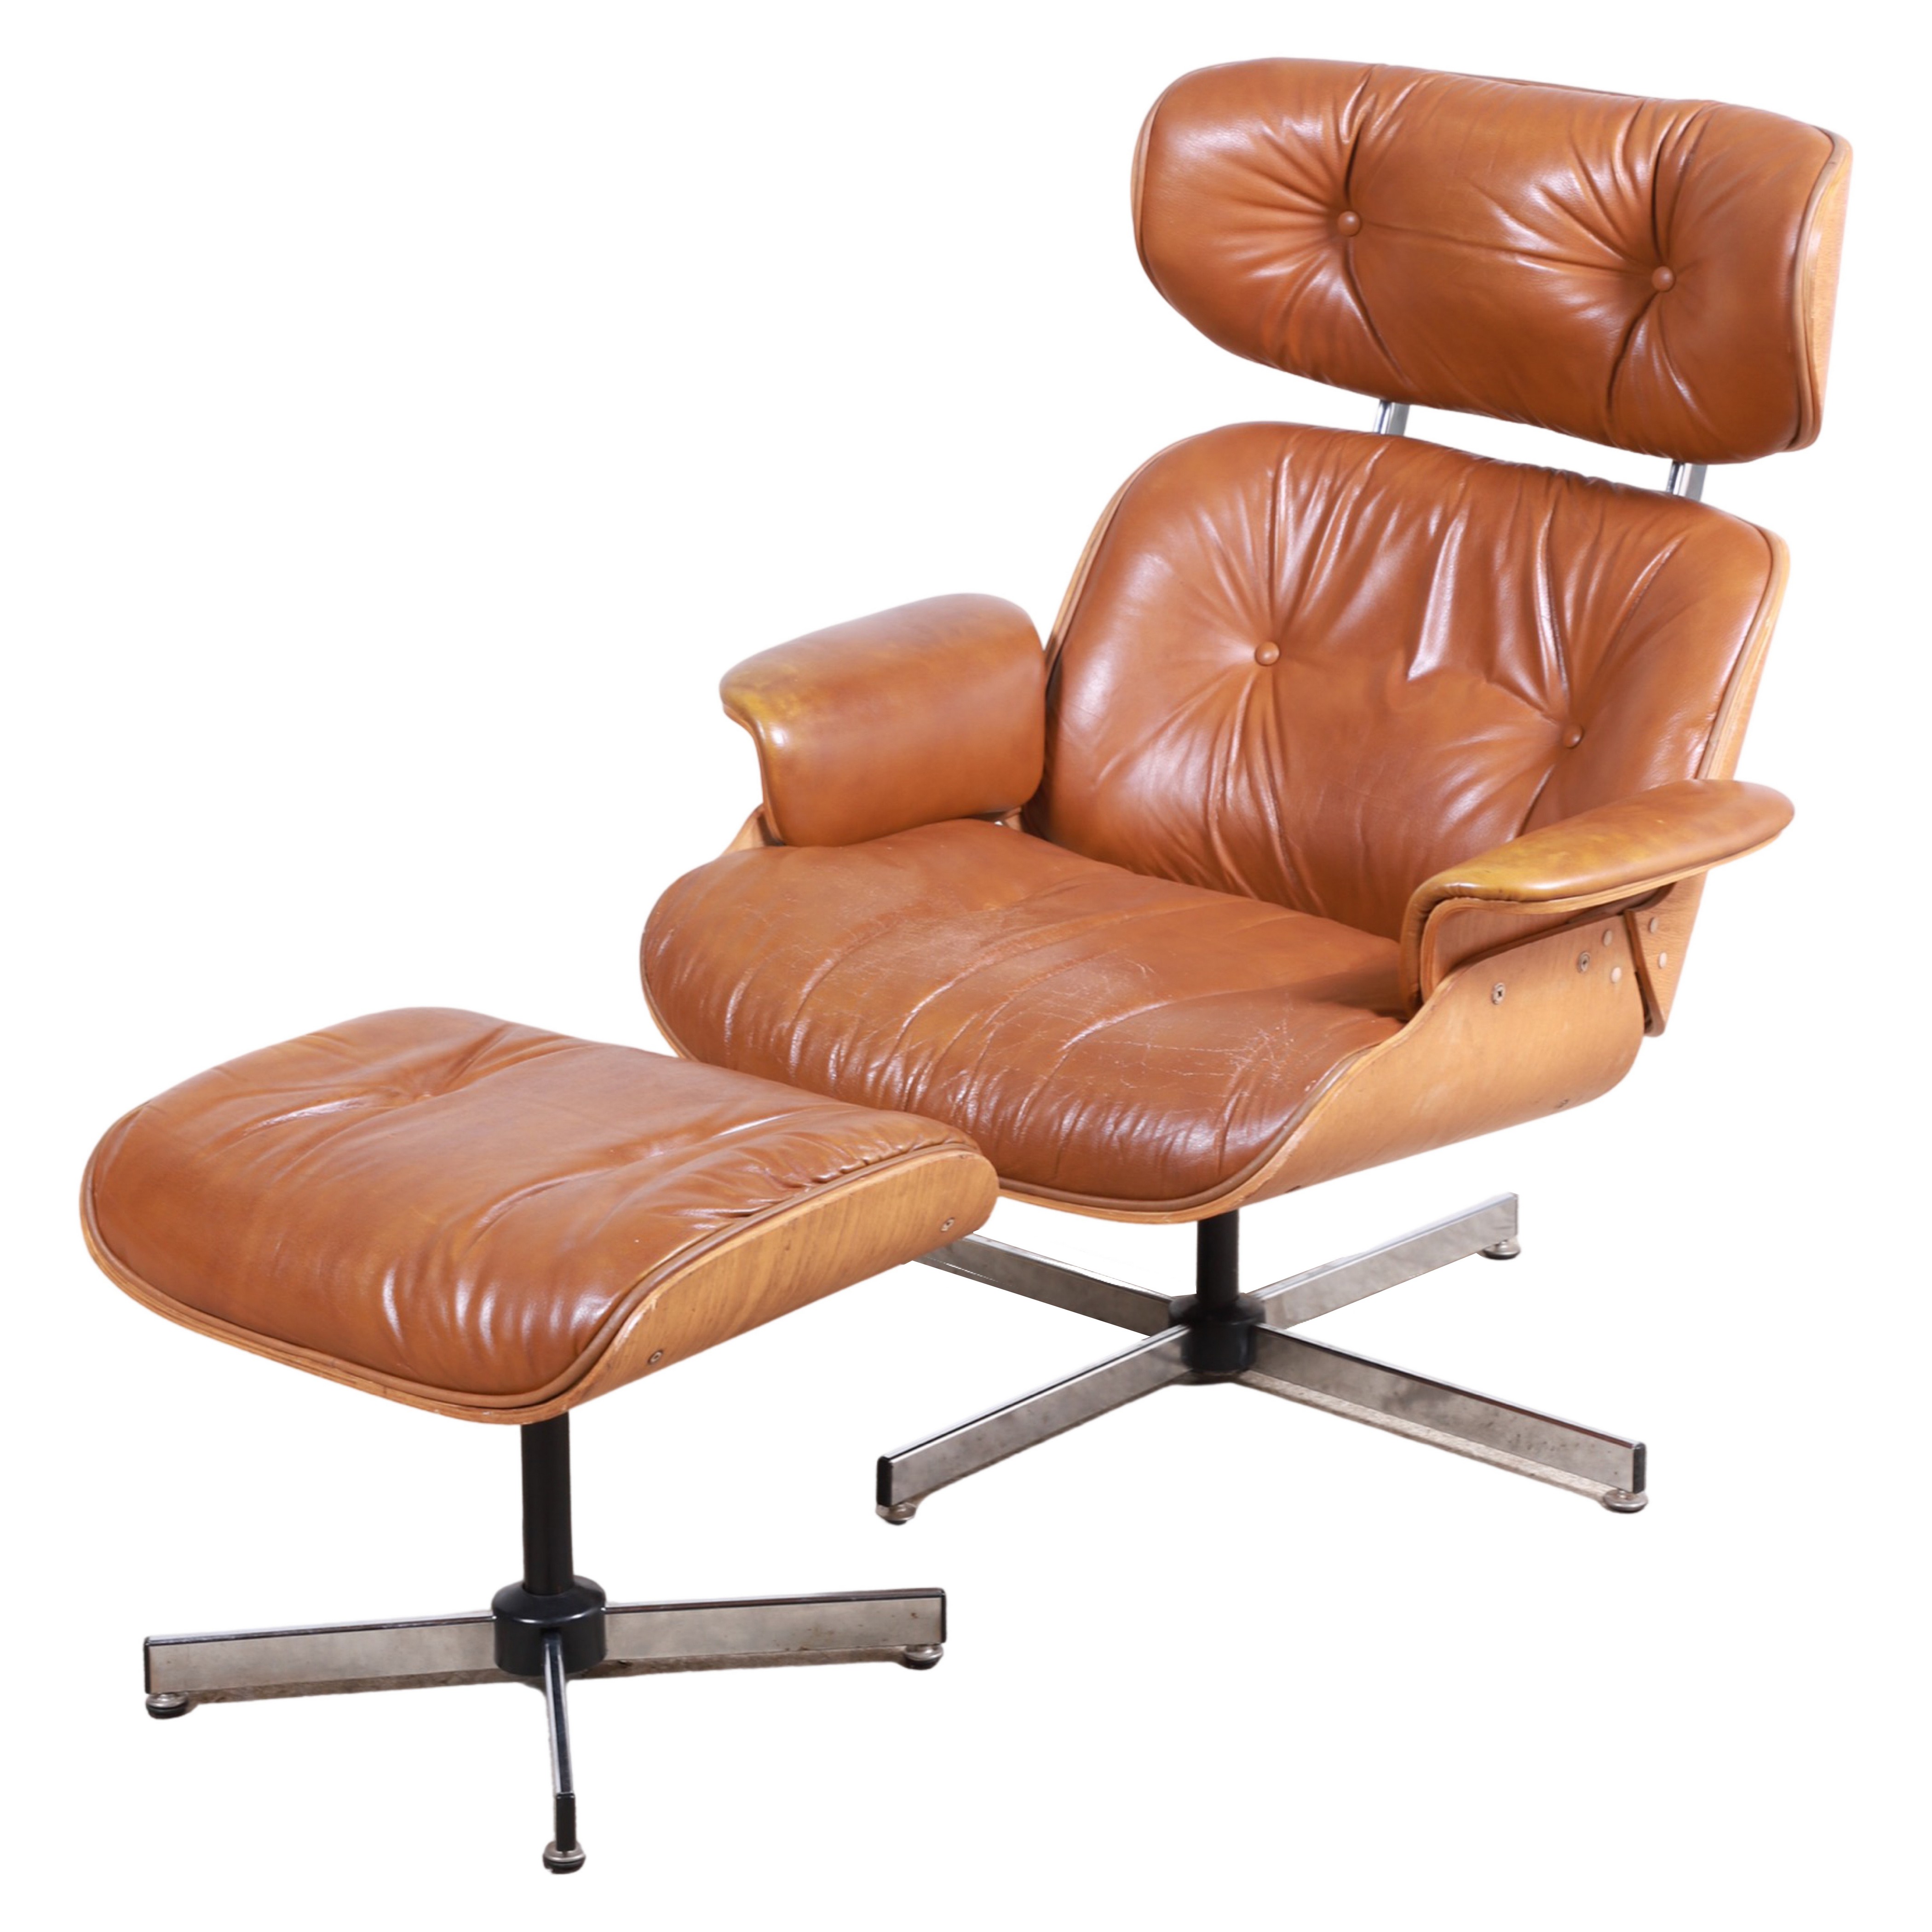 Eames style mahogany and leather